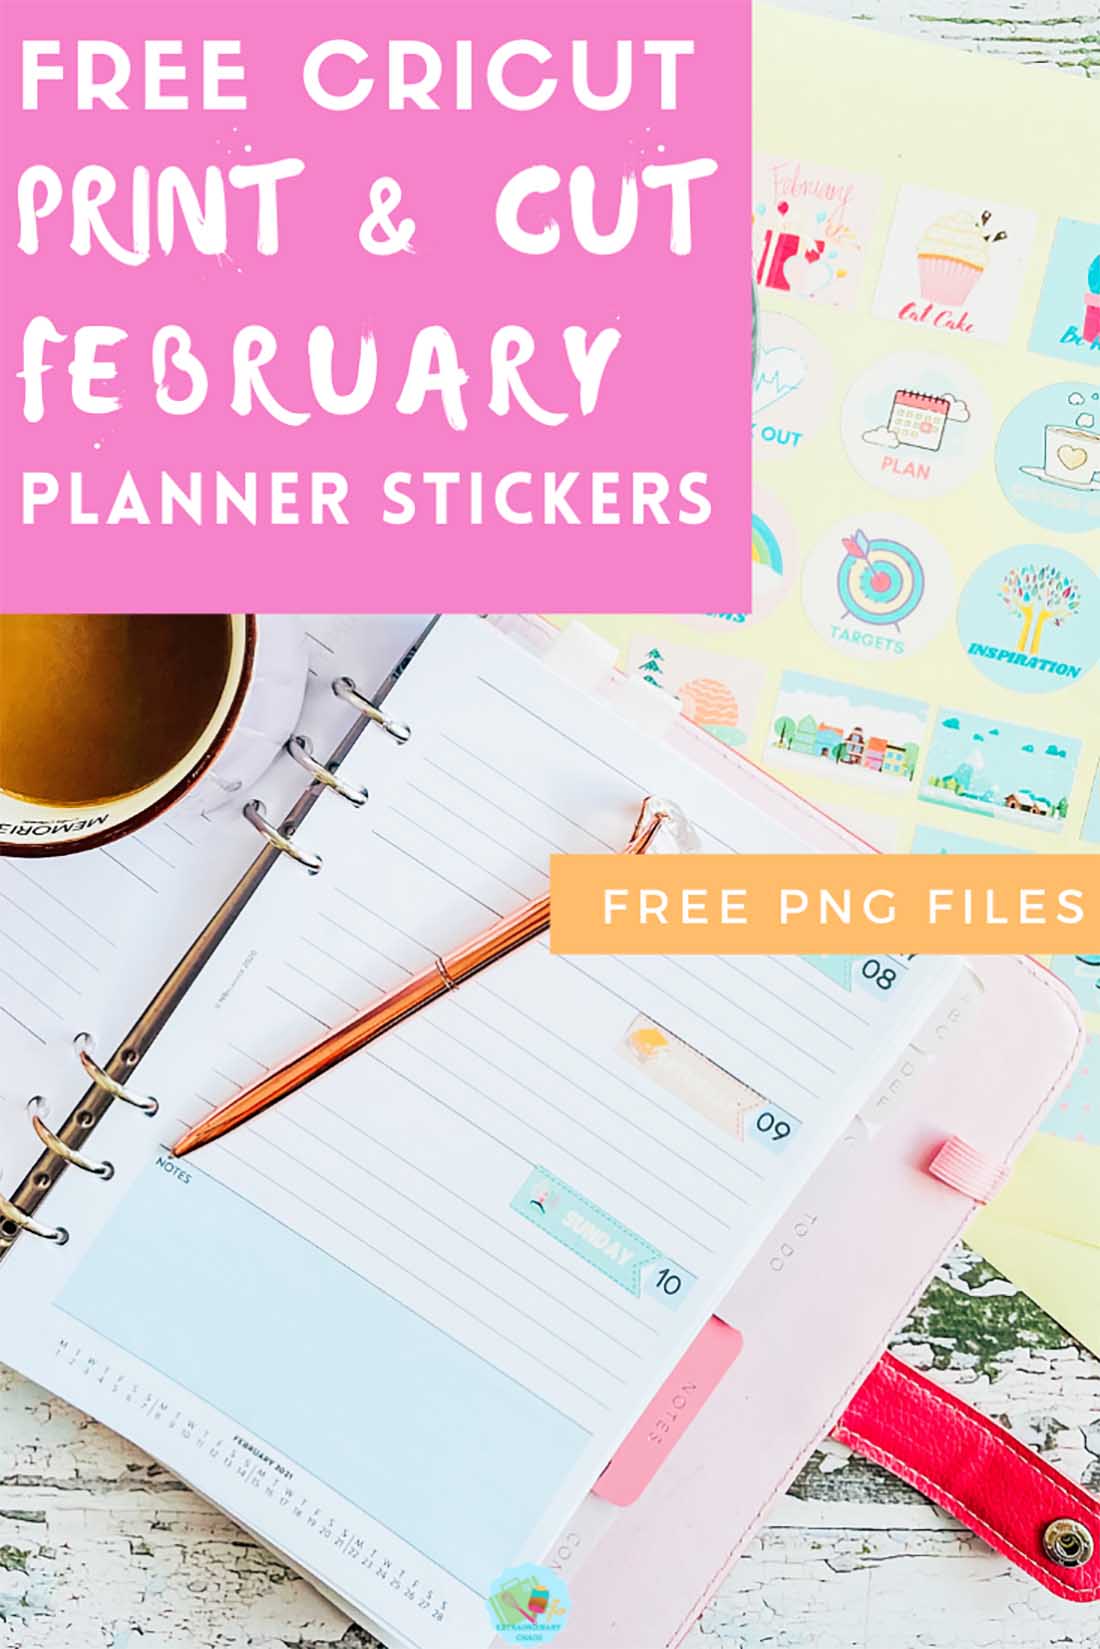 Free Cricut Print and cut February Planner Stickers